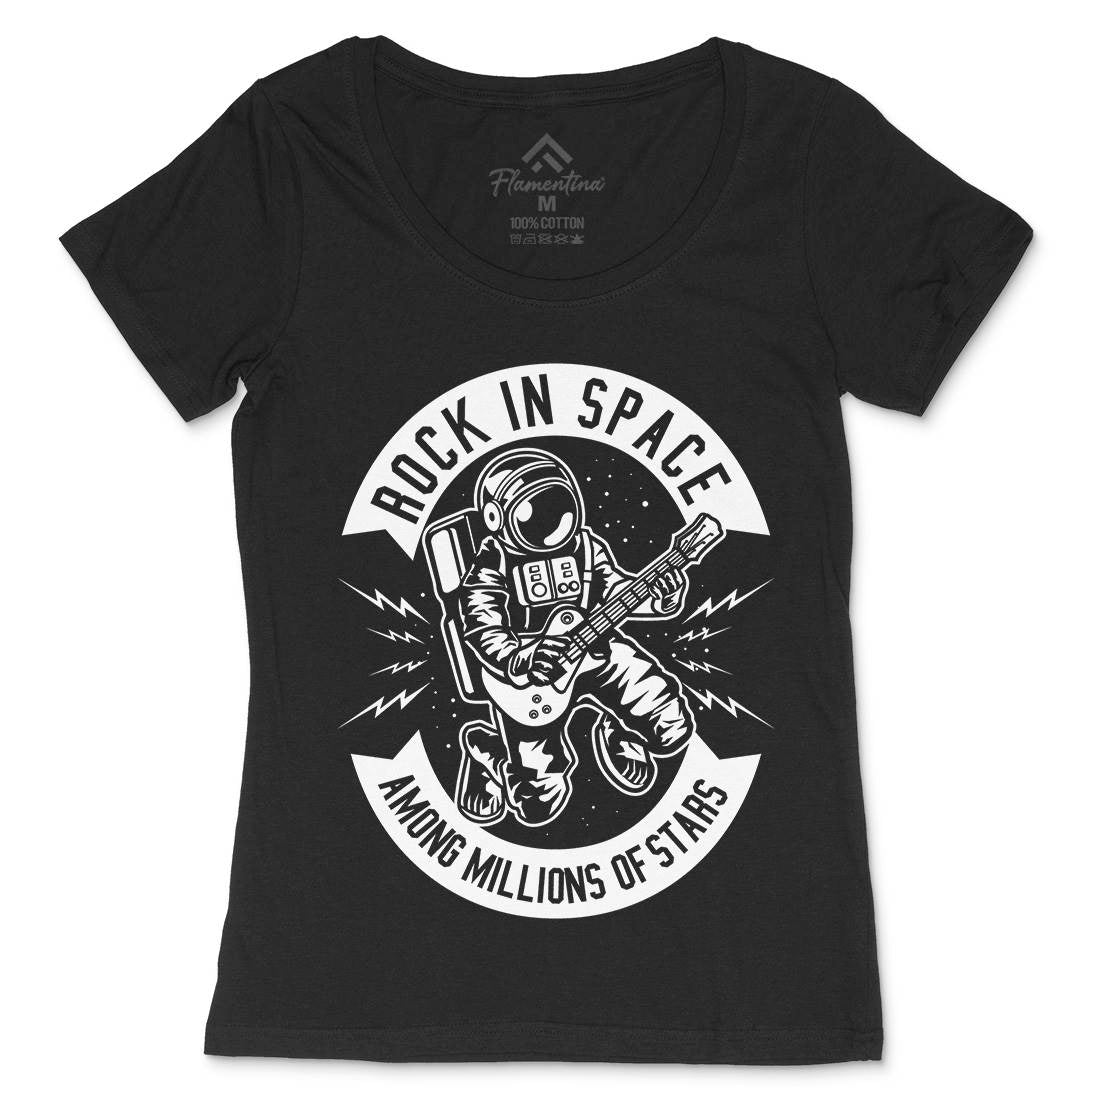 Rock In Space Womens Scoop Neck T-Shirt Music B612